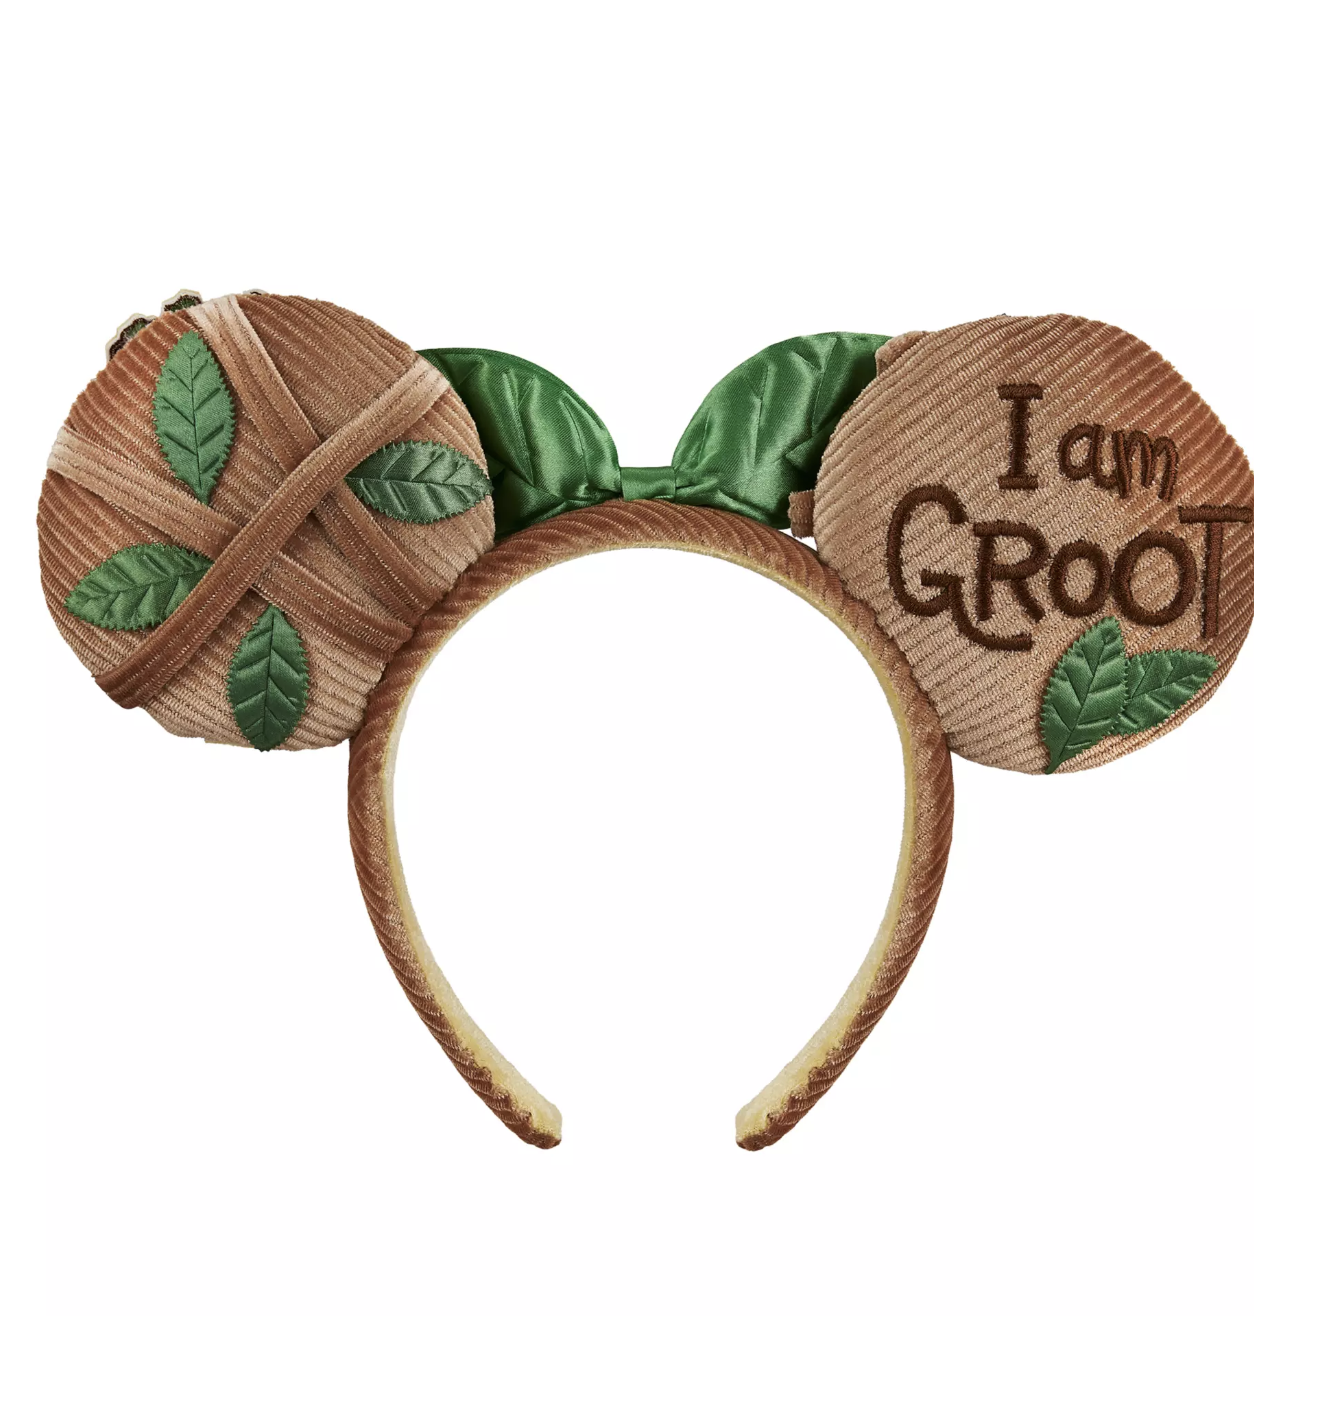 Disney Parks Guardians of the Galaxy Groot Ear Headband for Adults New with Tag